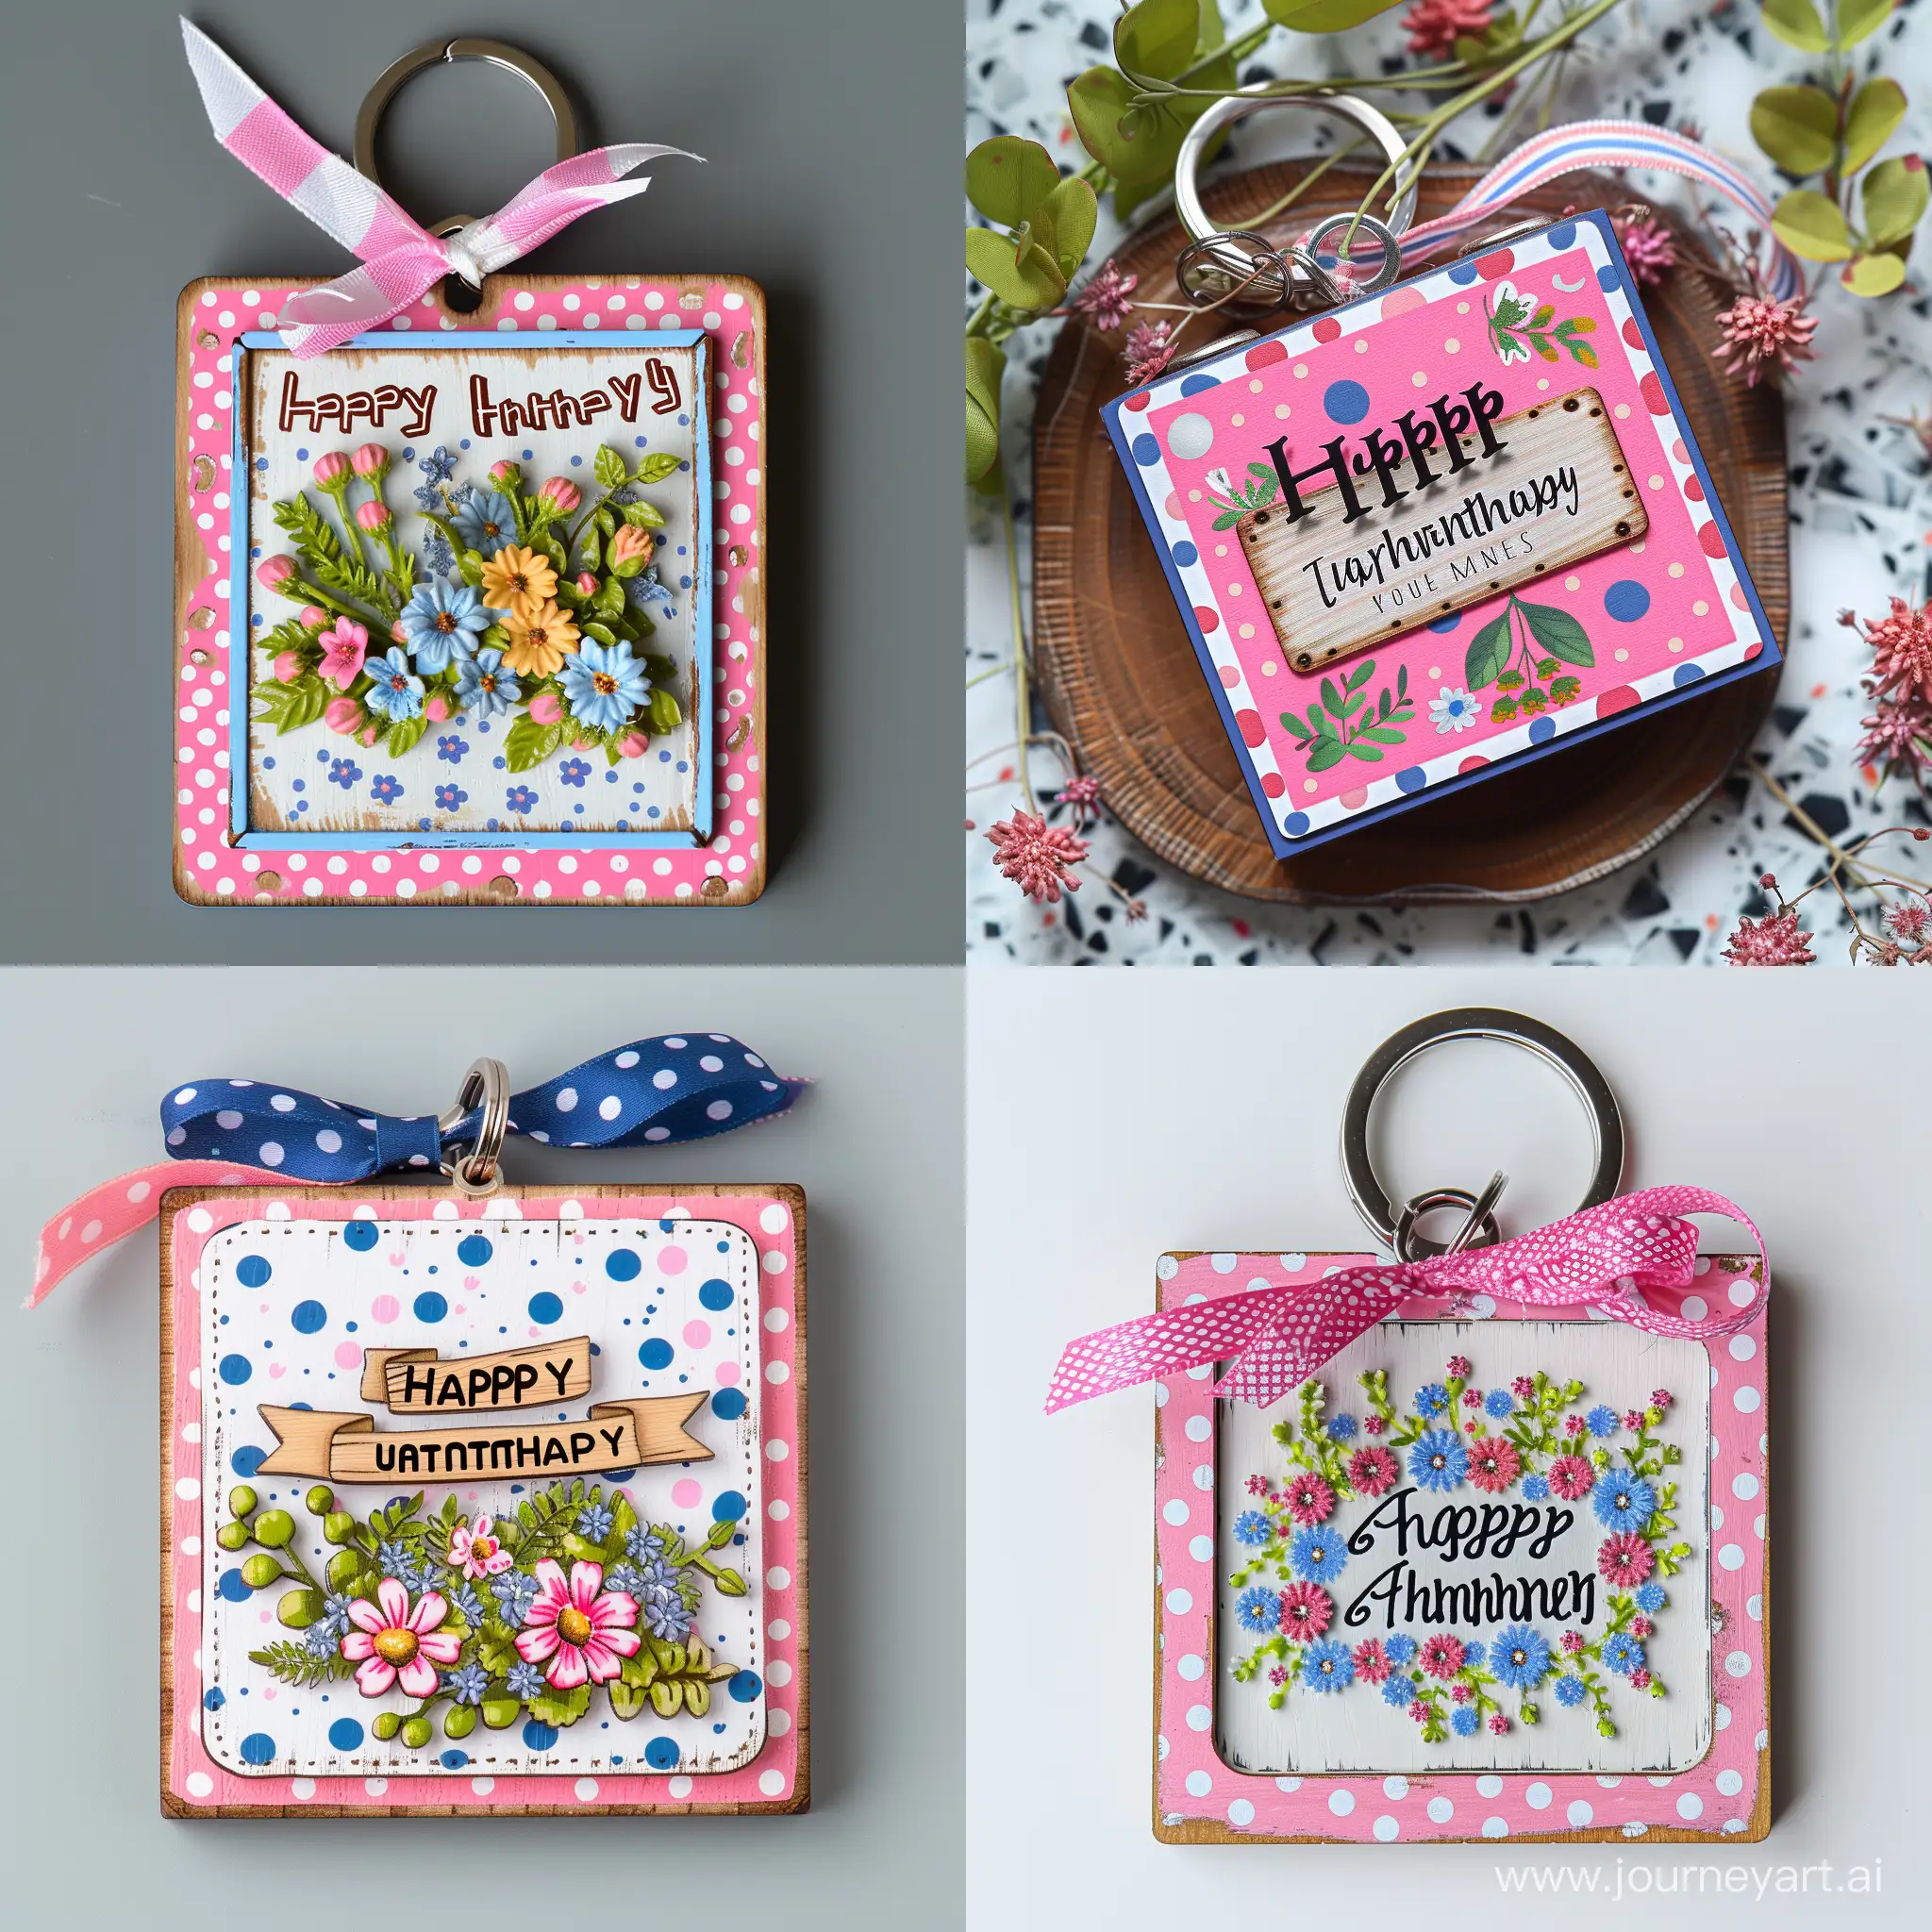 Happy-Anniversary-Wooden-Keychain-with-Pink-and-Blue-Polka-Dot-Design